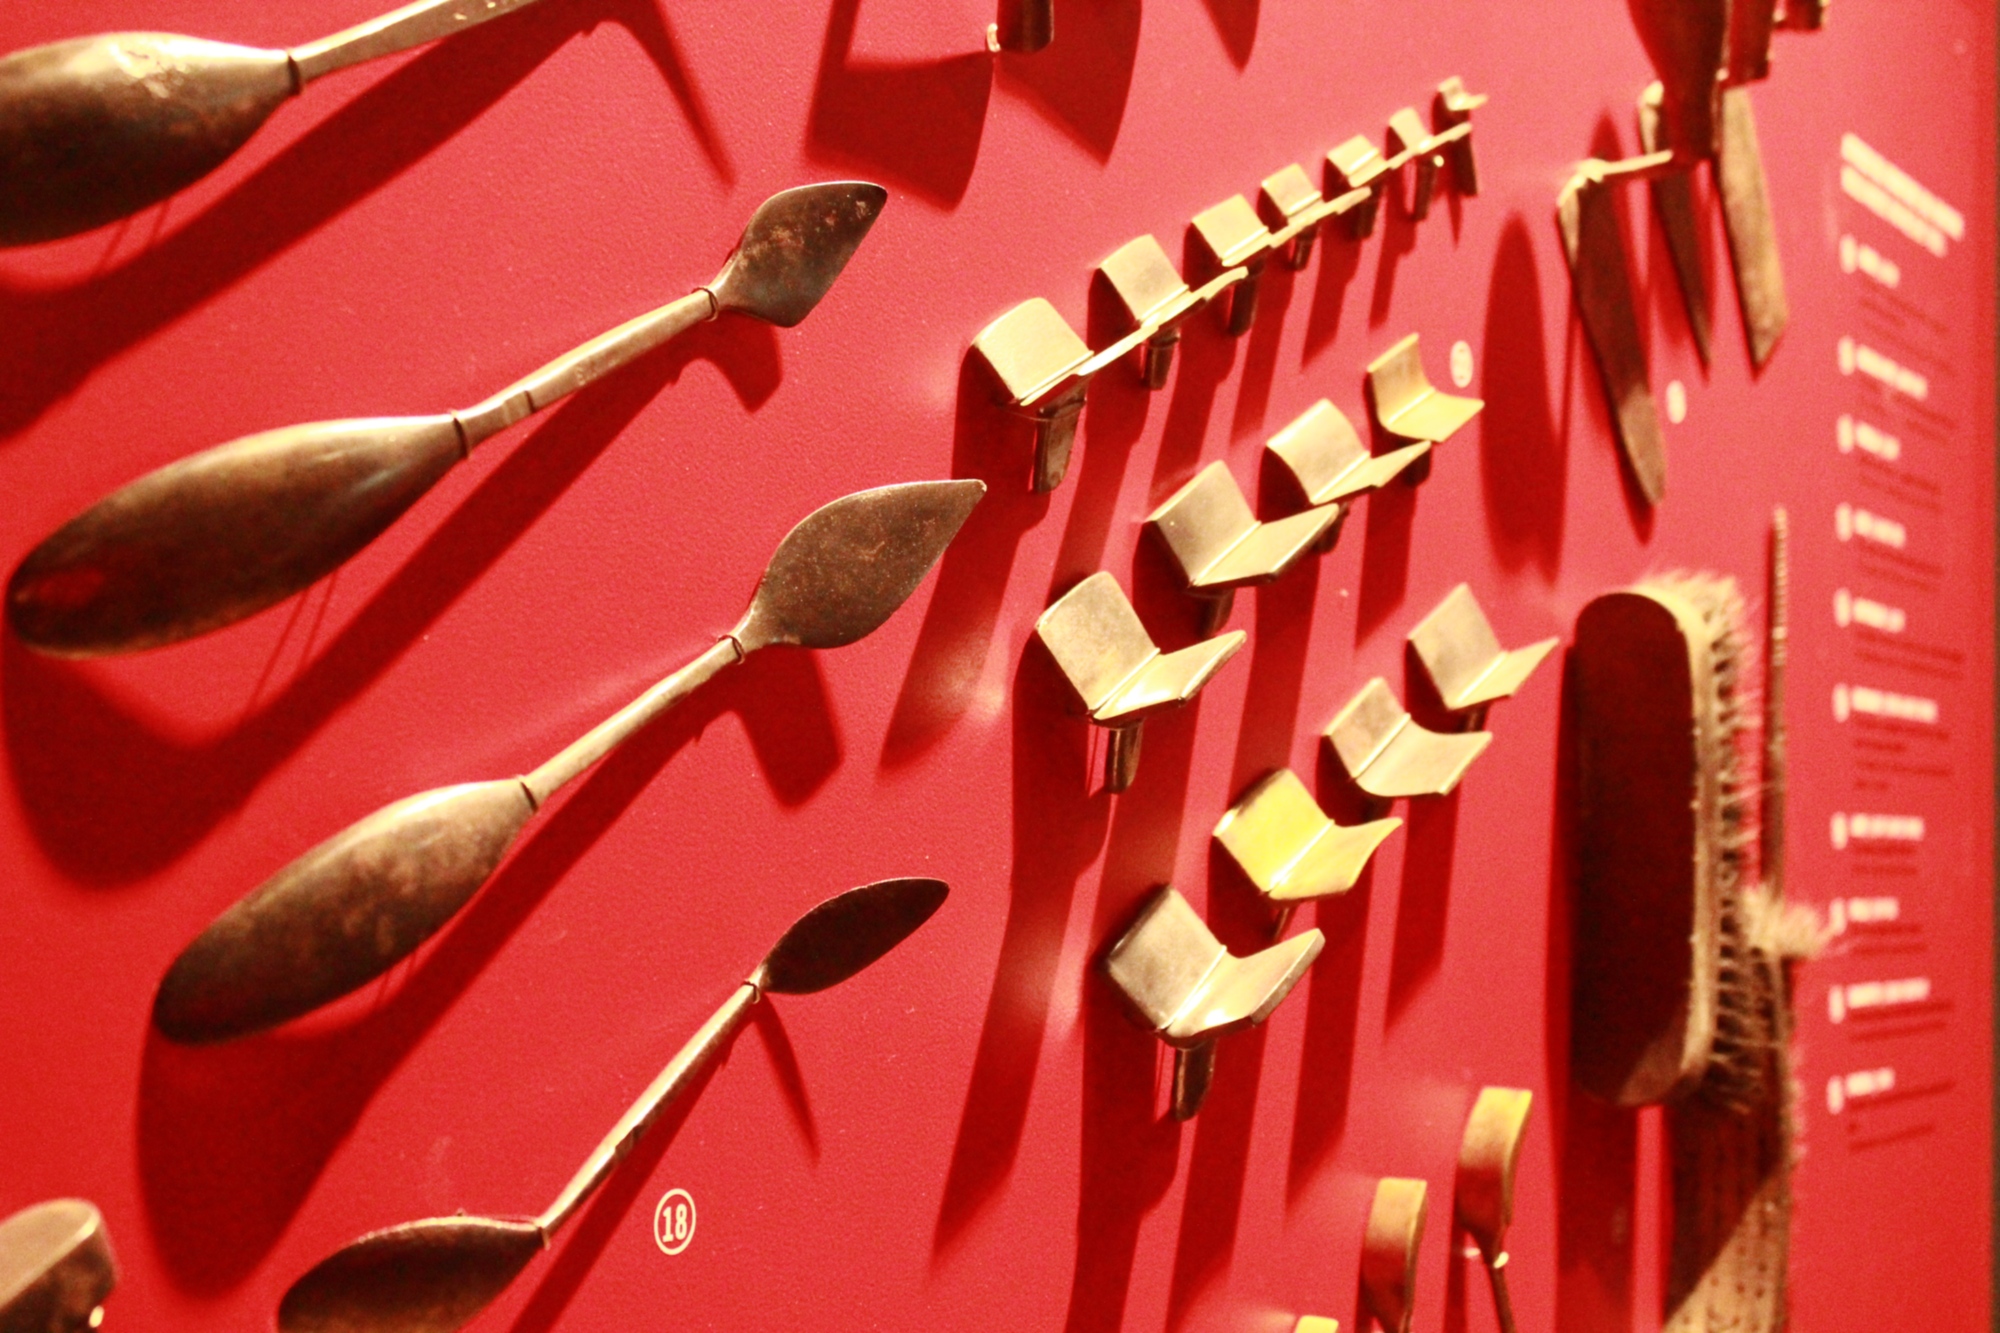 Display of tools at MAGMA, Museum of Cast Iron Arts in Follonica